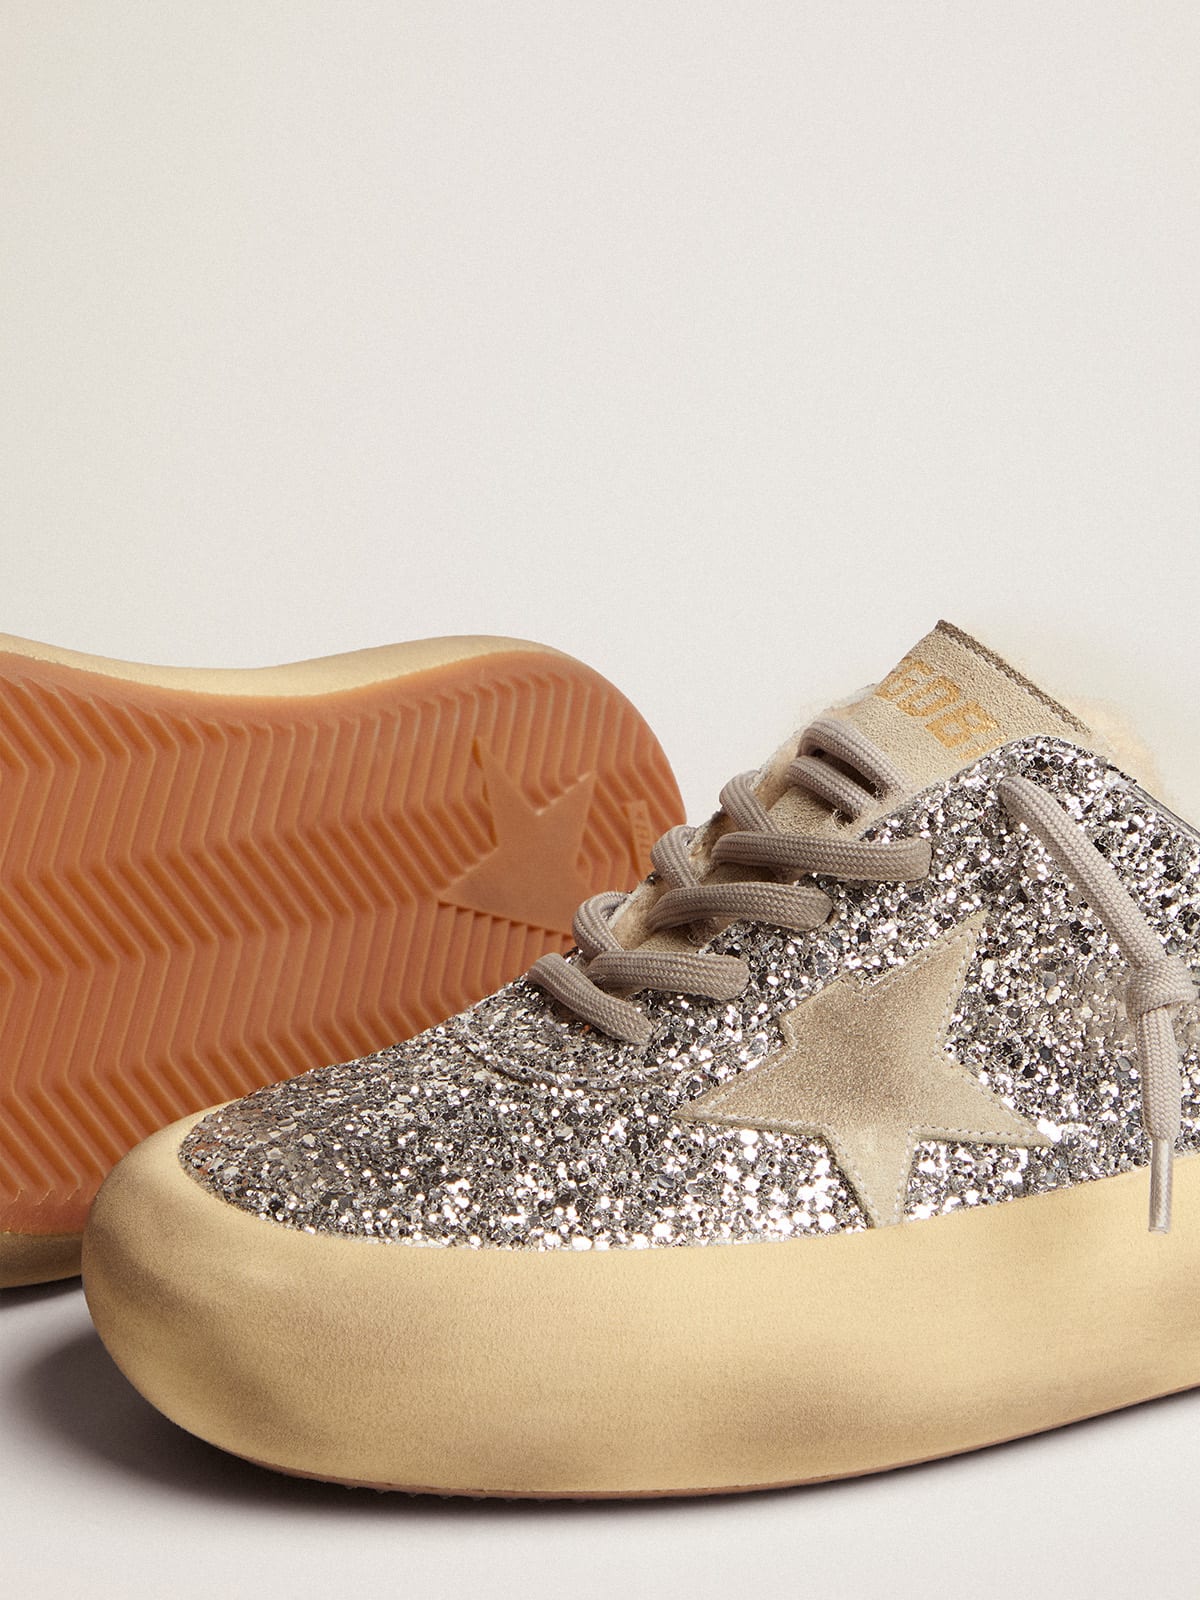 Golden Goose - Women's Space-Star Sabot in silver glitter and shearling lining in 